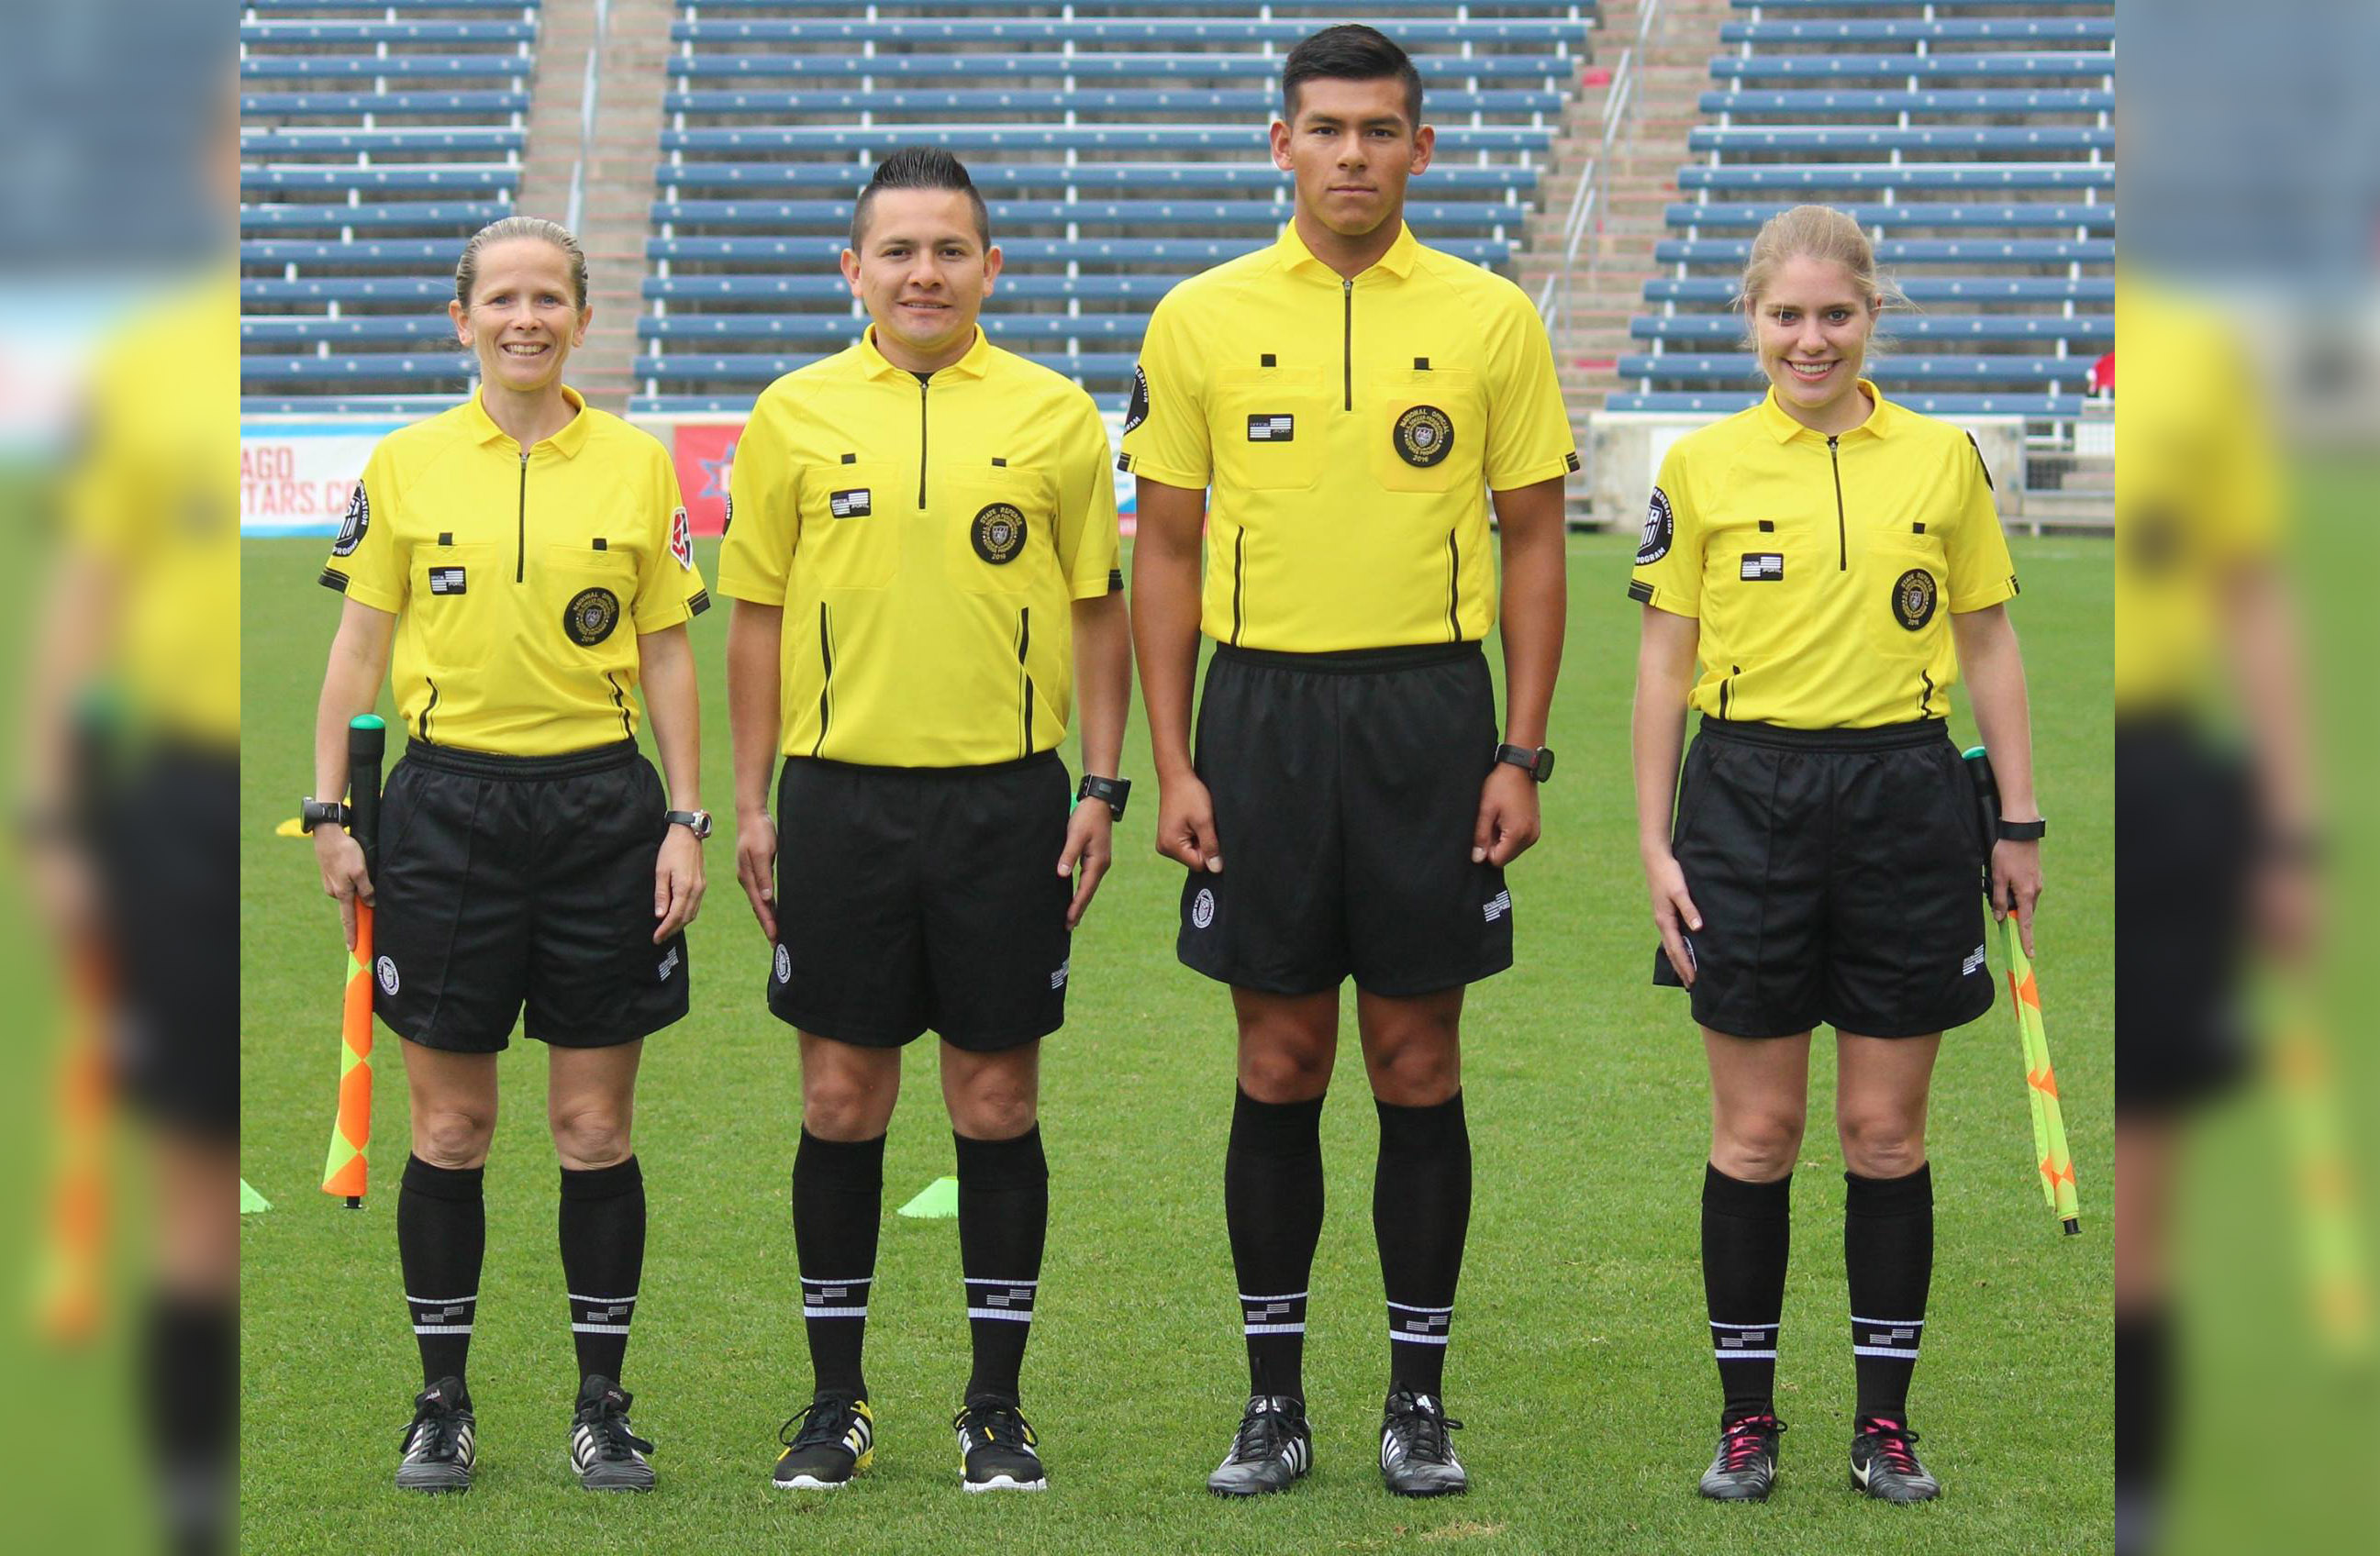 new-referee-uniforms-from-official-sports-cnra